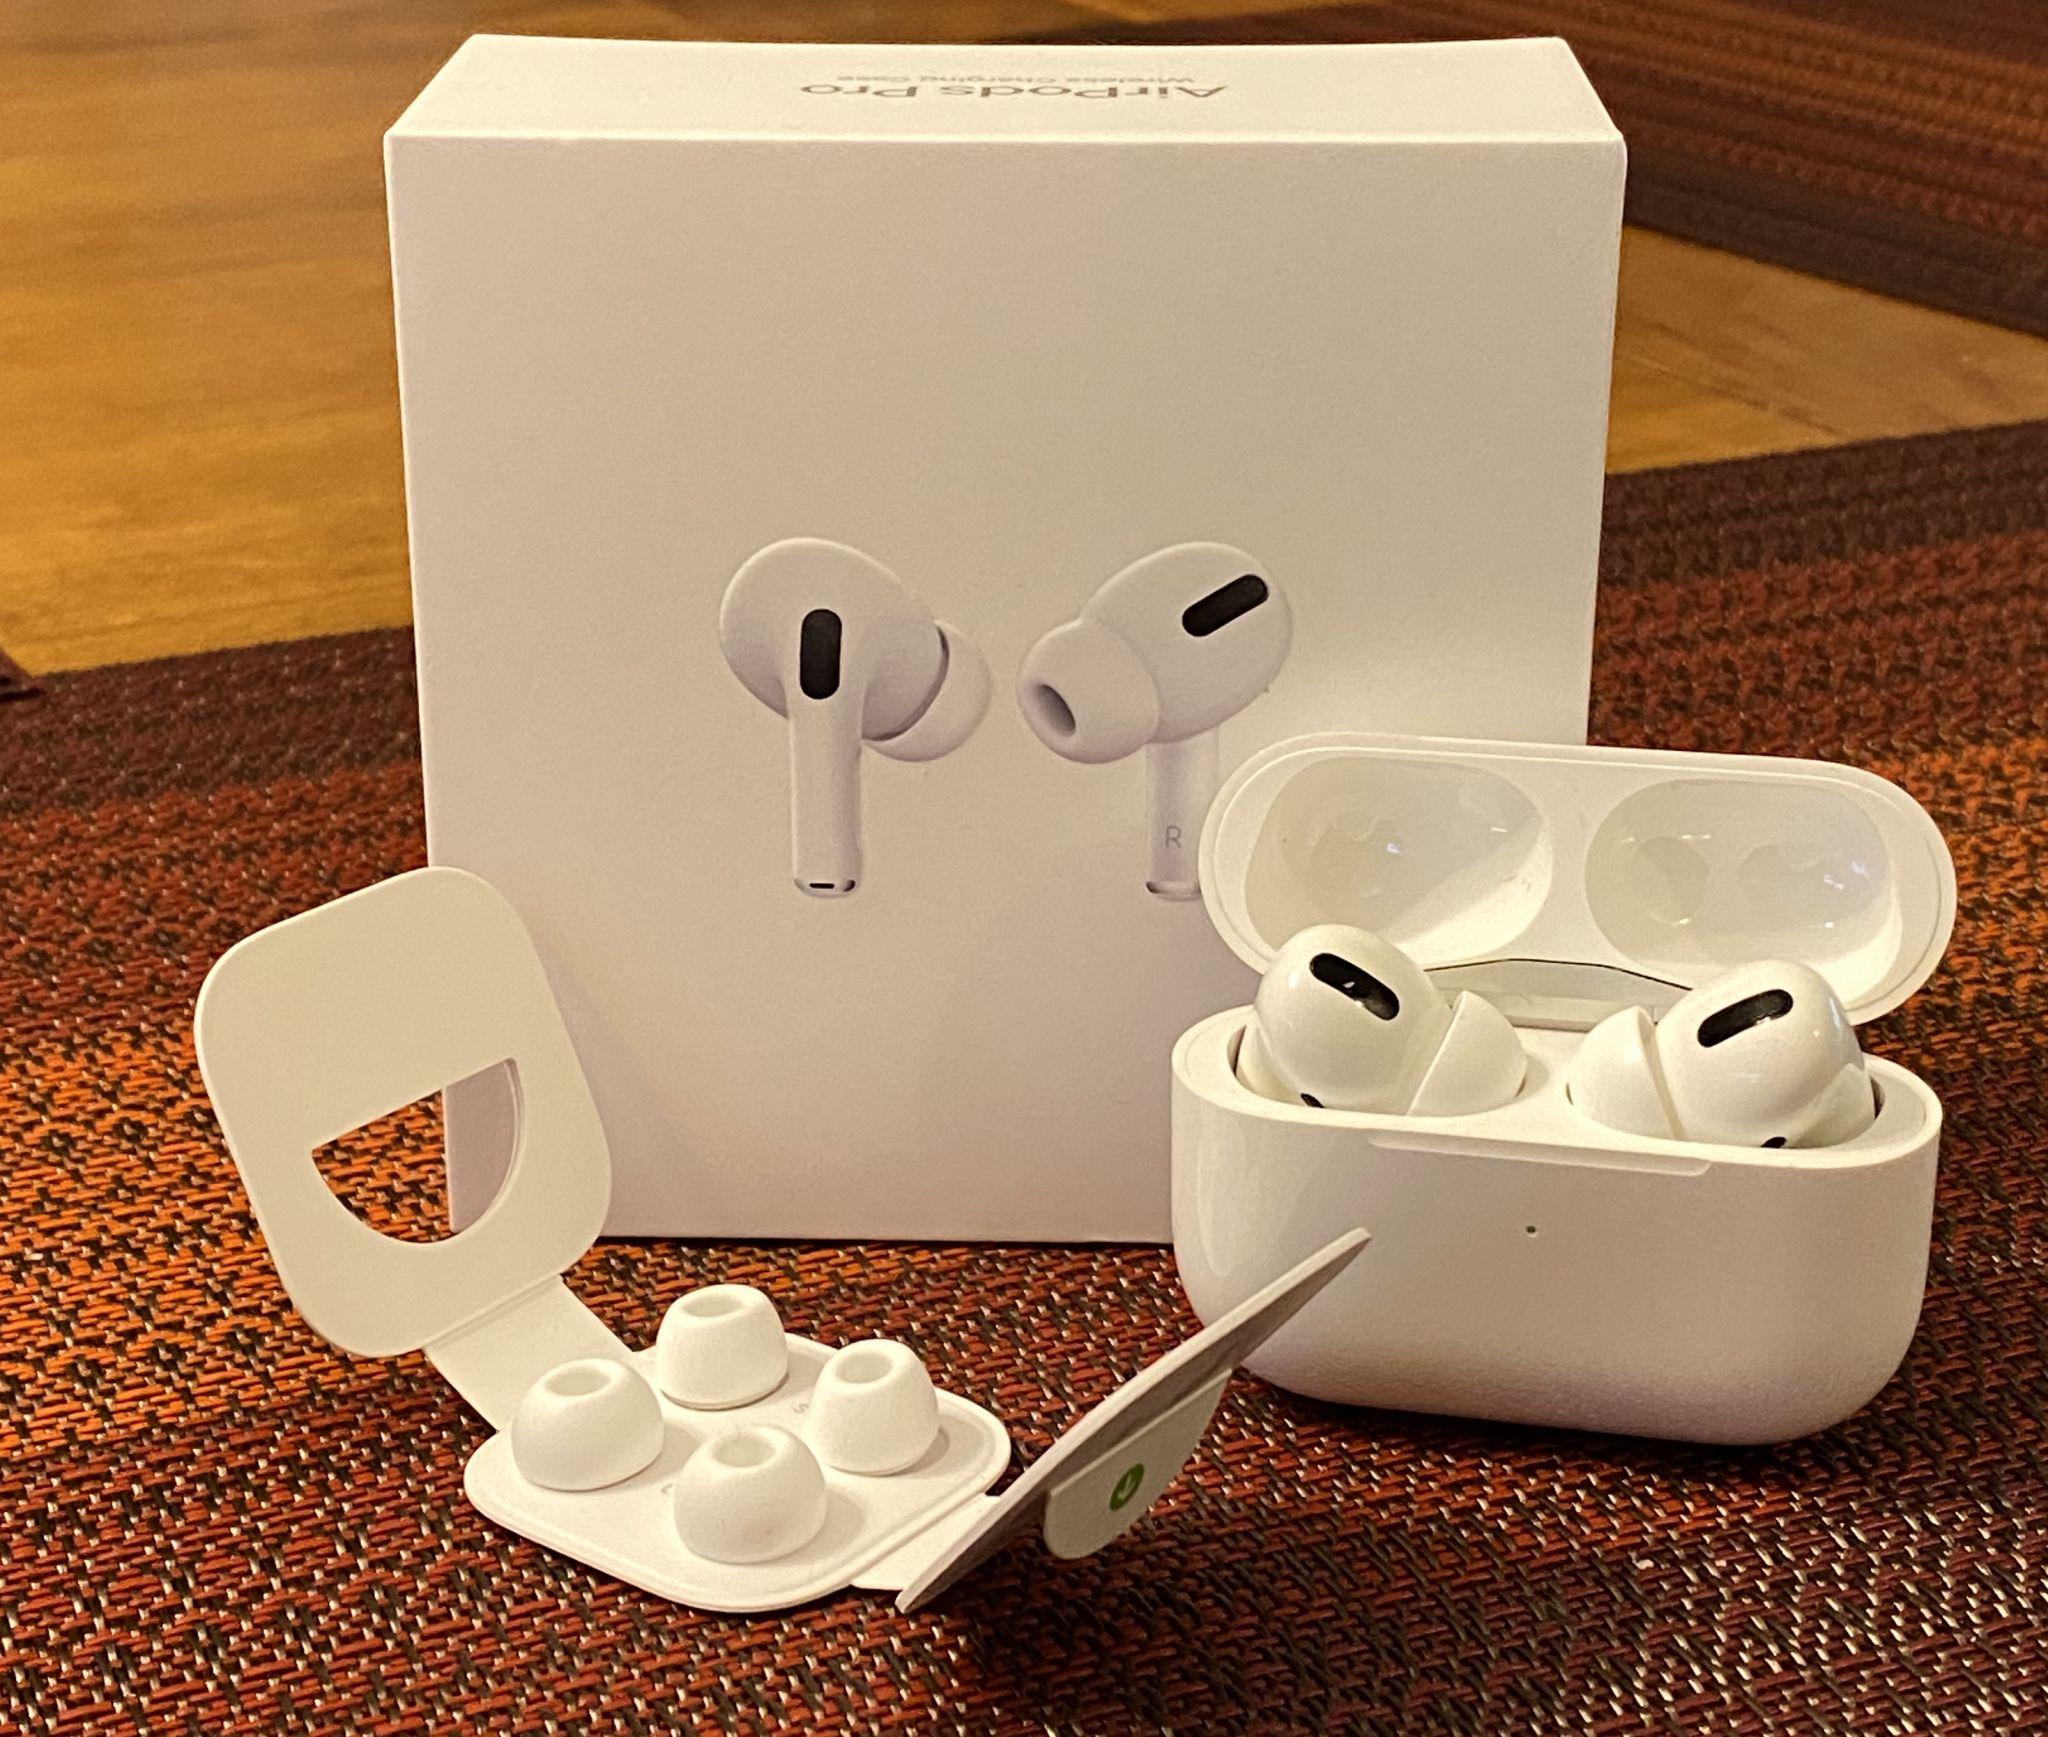 At $250, are Apple's AirPods Pro worth it?